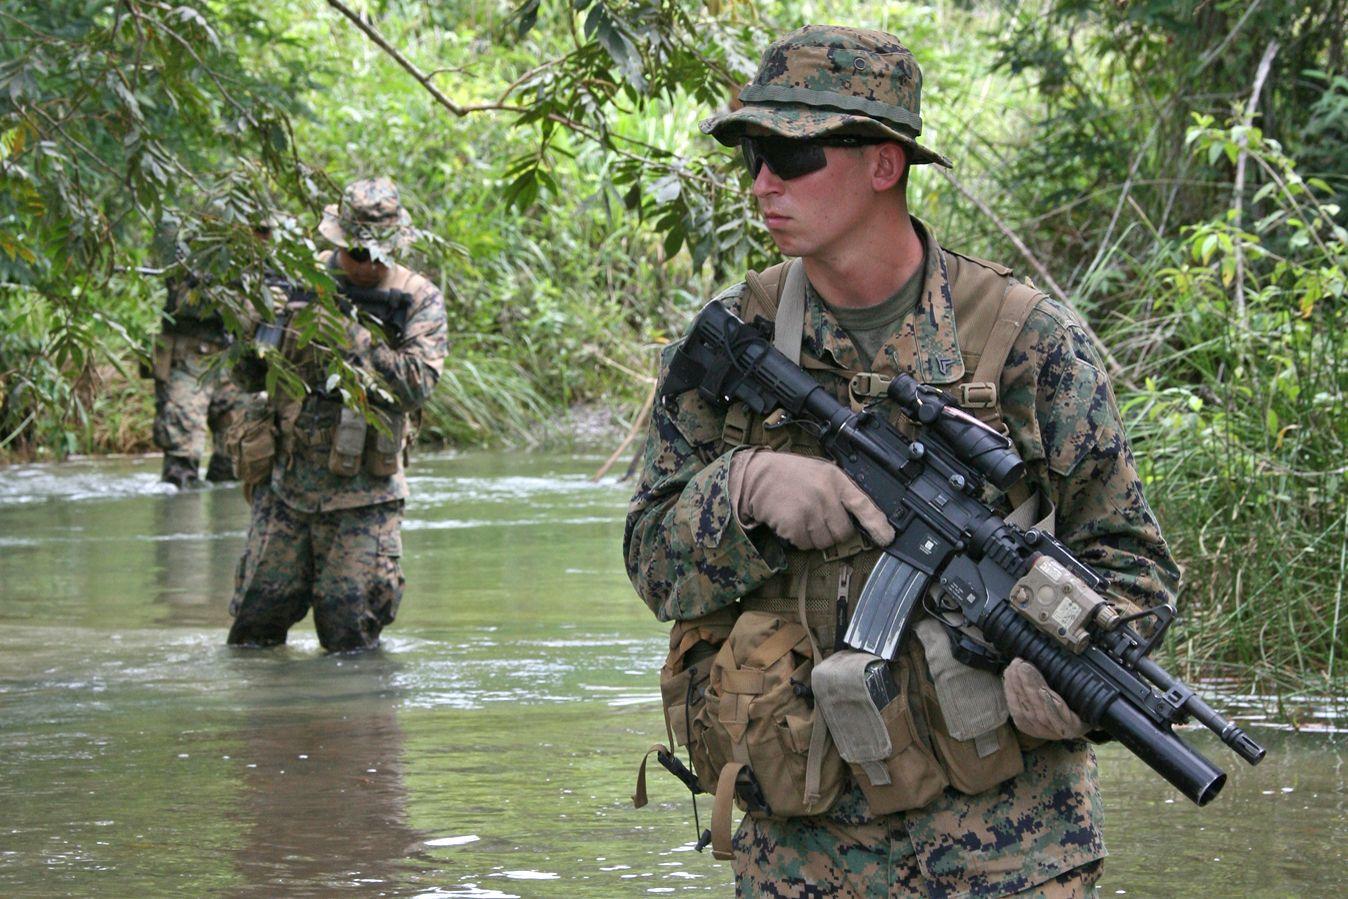 This is the Marine recon task force. They do stealthy missions